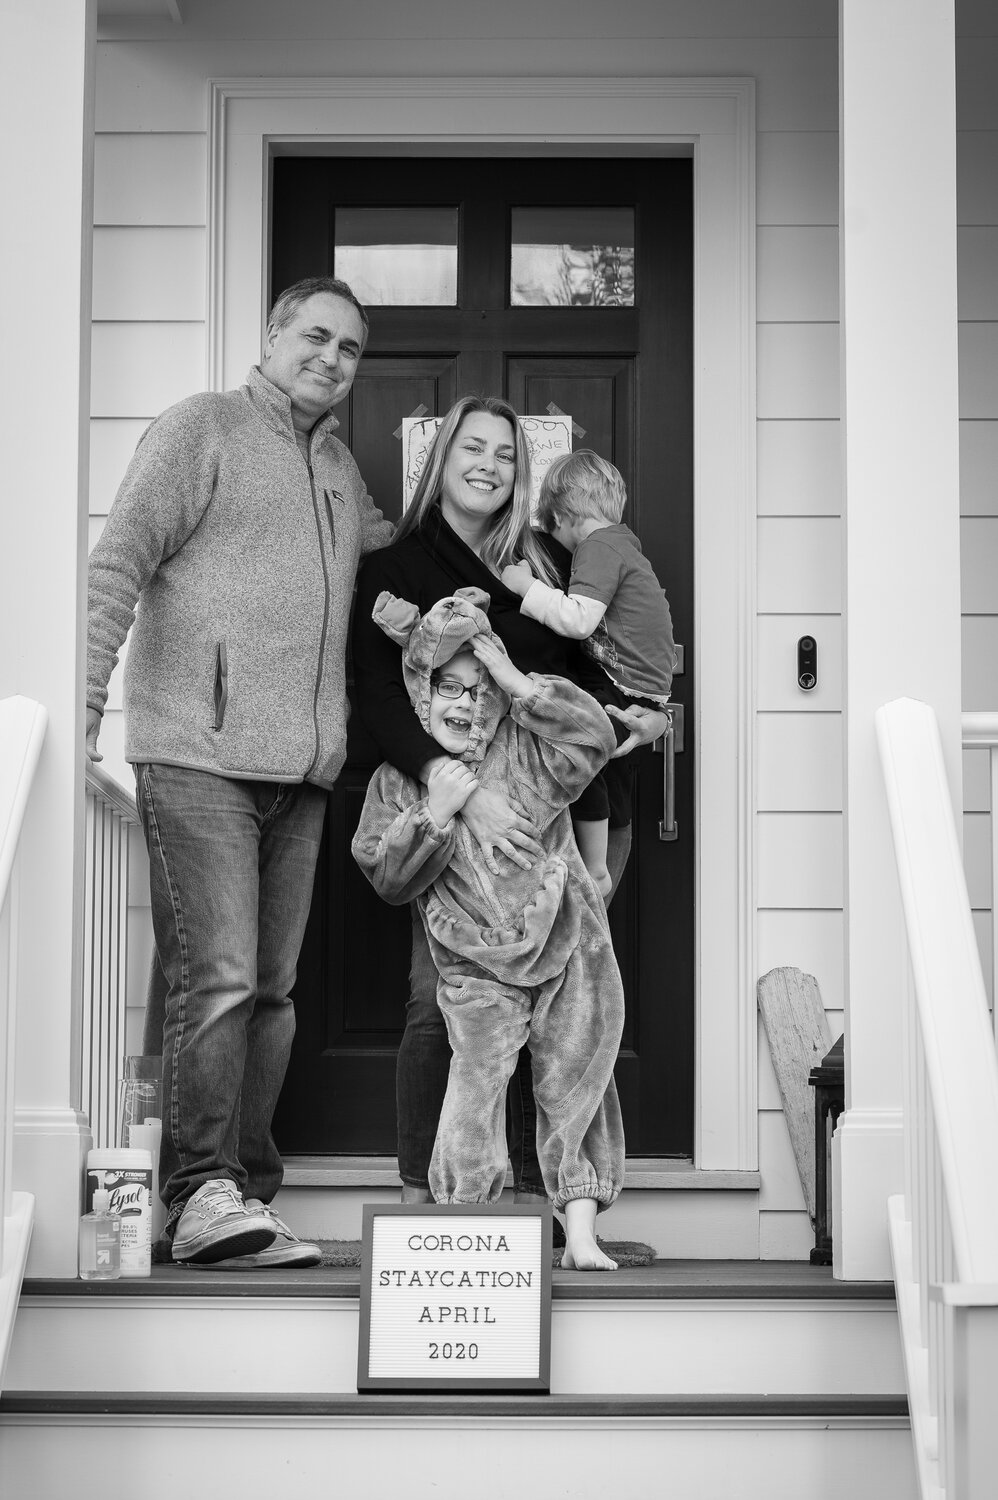 The Karpowich Family for The Family Porch-Rait Project, a fundraiser for The Open Door © 2020 Shawn G. Henry 